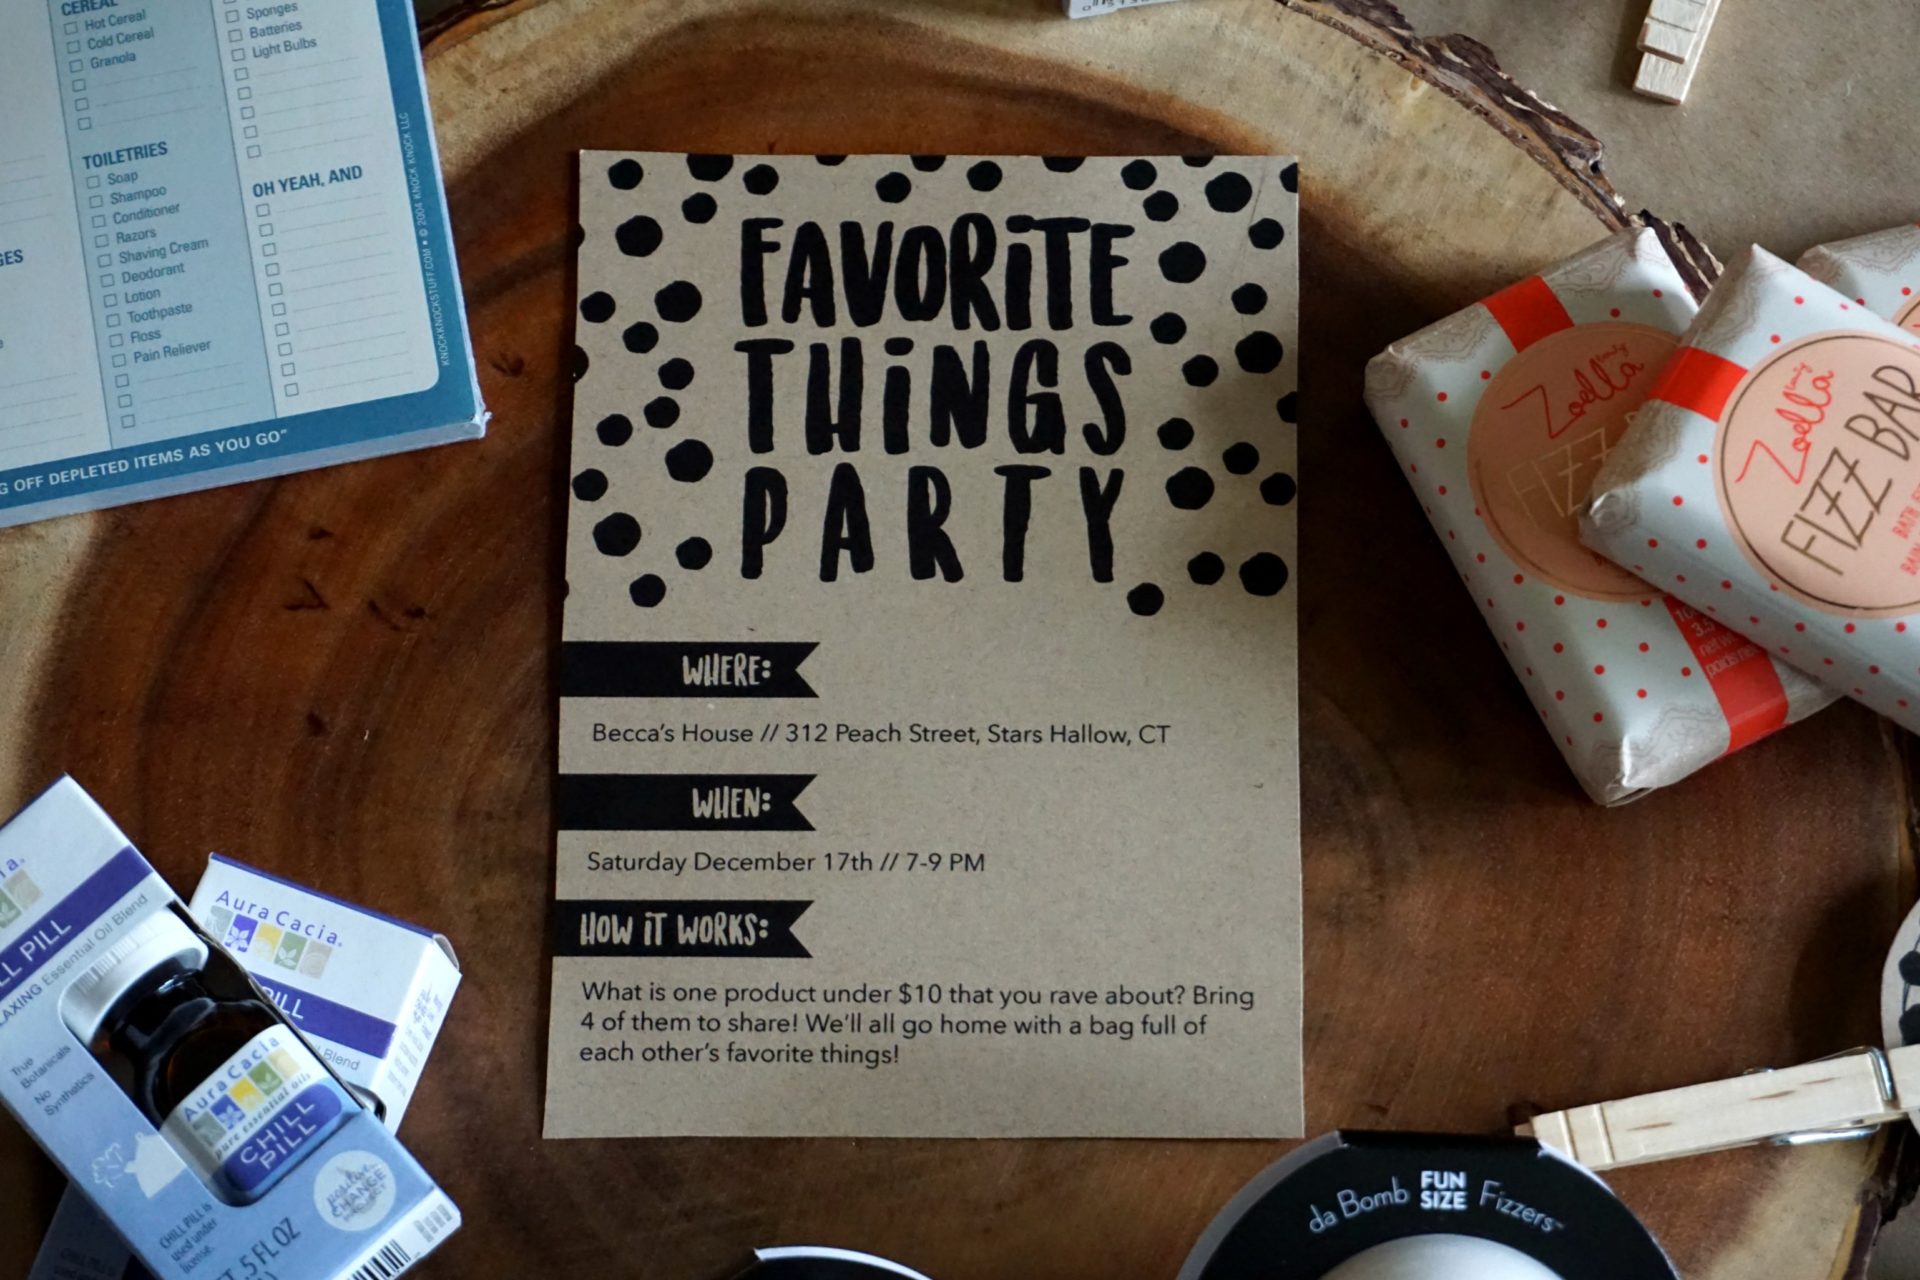 How To Throw A Favorite Things Party! - Living in Yellow